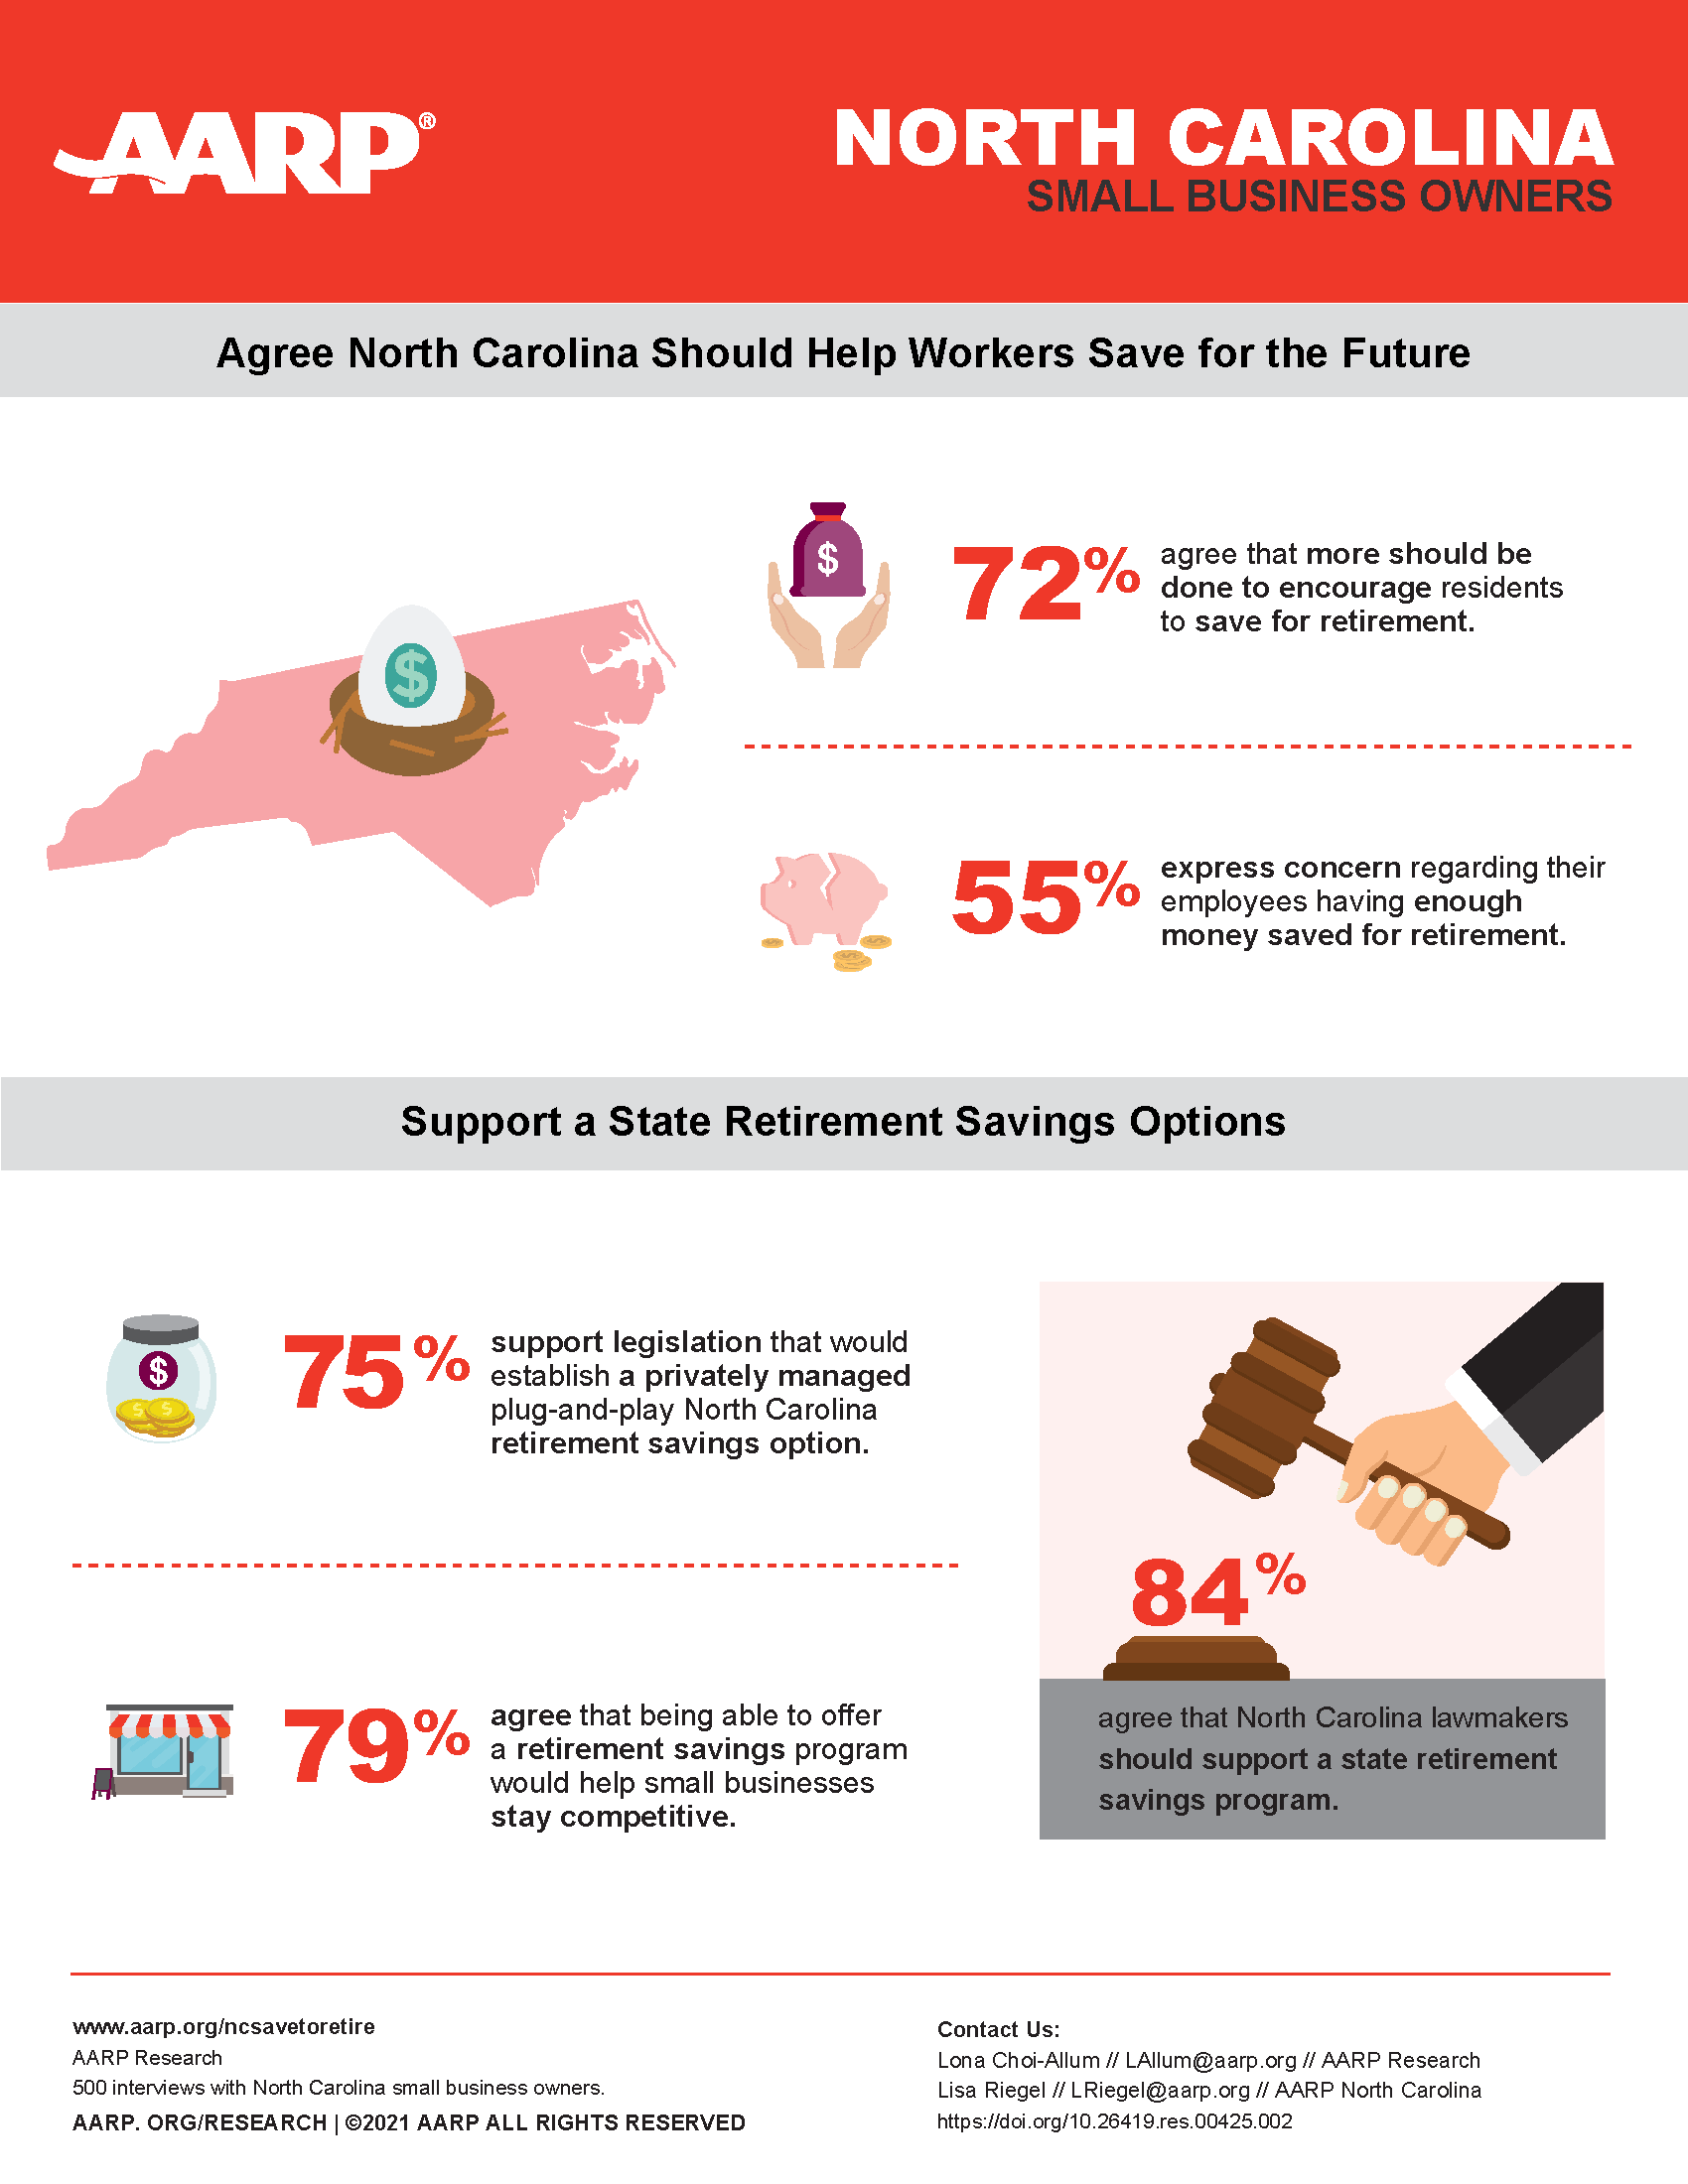 AARP-887 NORTH CAROLINA Small Bus Owners 2.0 Infographic v61.png